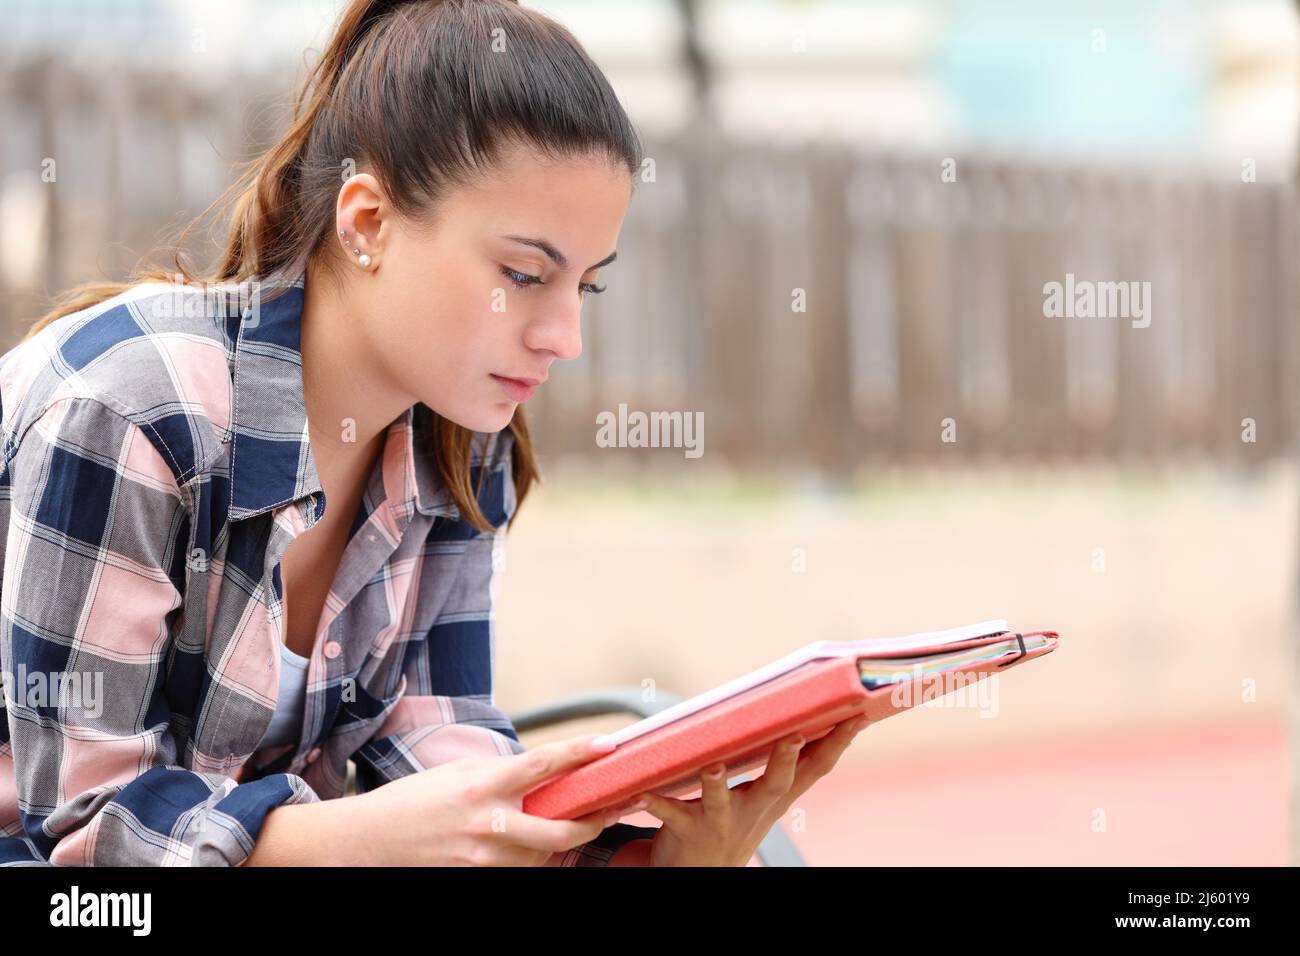 Concentrated student studying memorizing notes sitting on a bench in a park Stock Photo